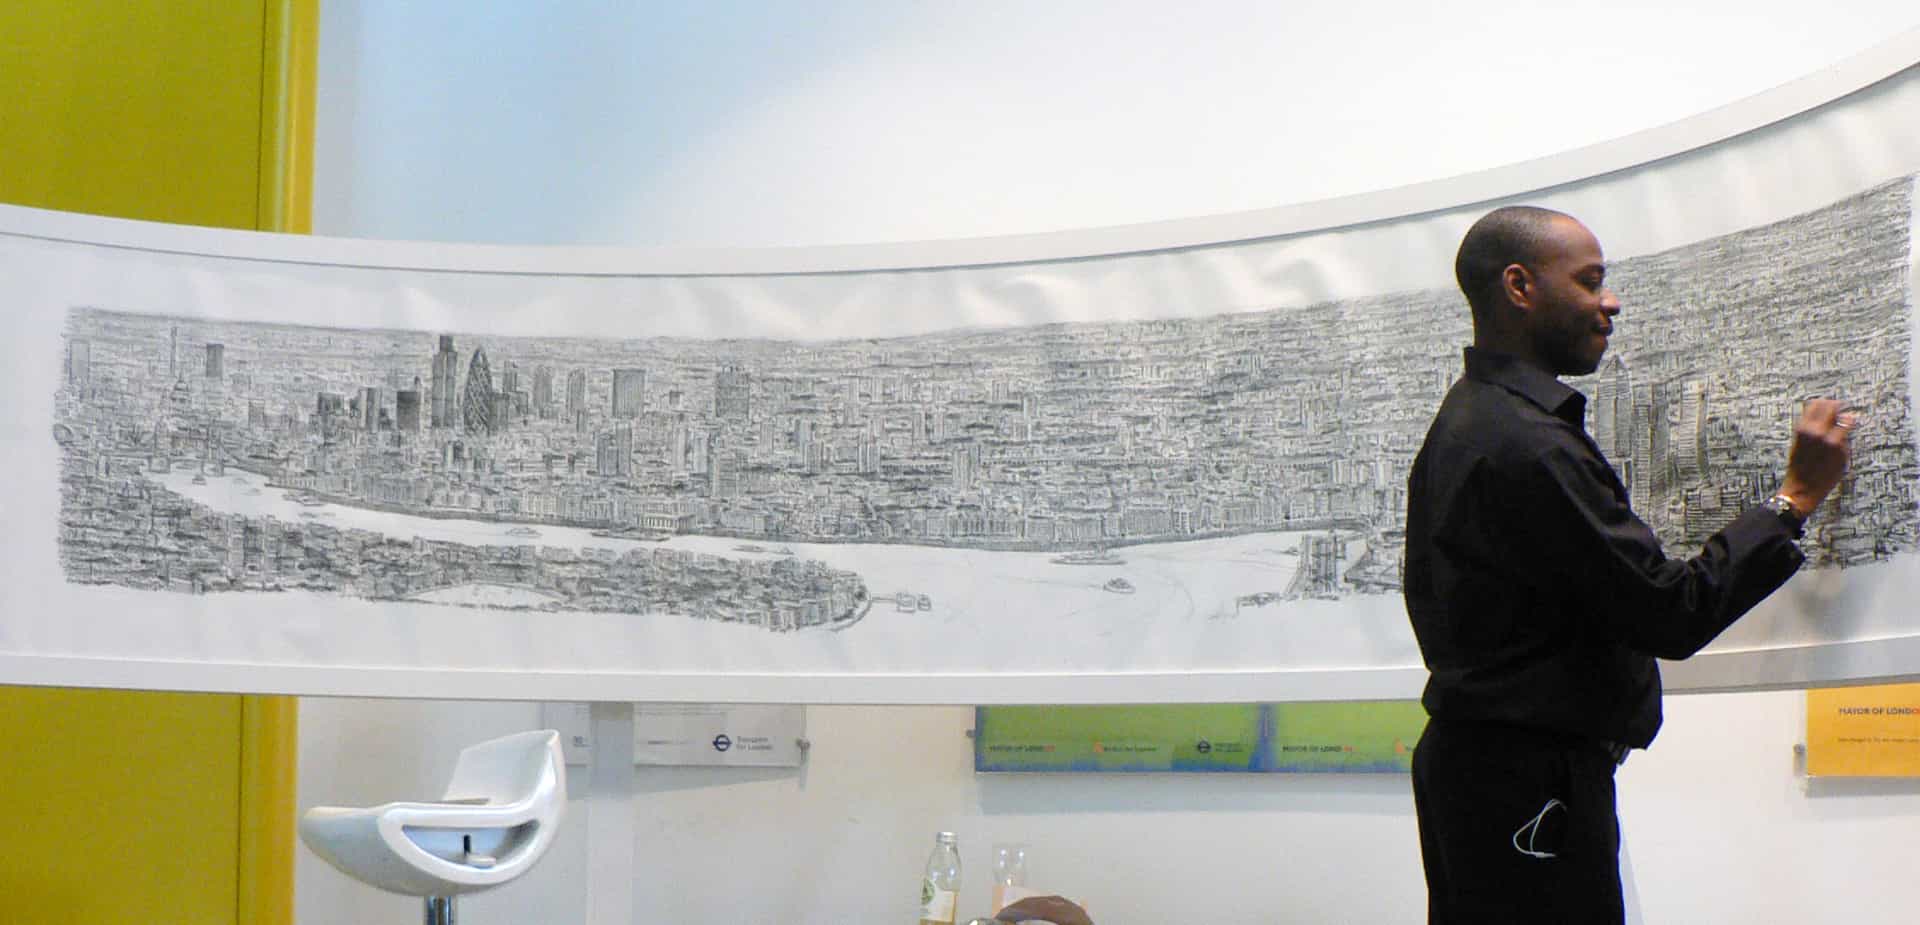 Stephen Wiltshire's London Panorama drawing - The Stephen Wiltshire Gallery